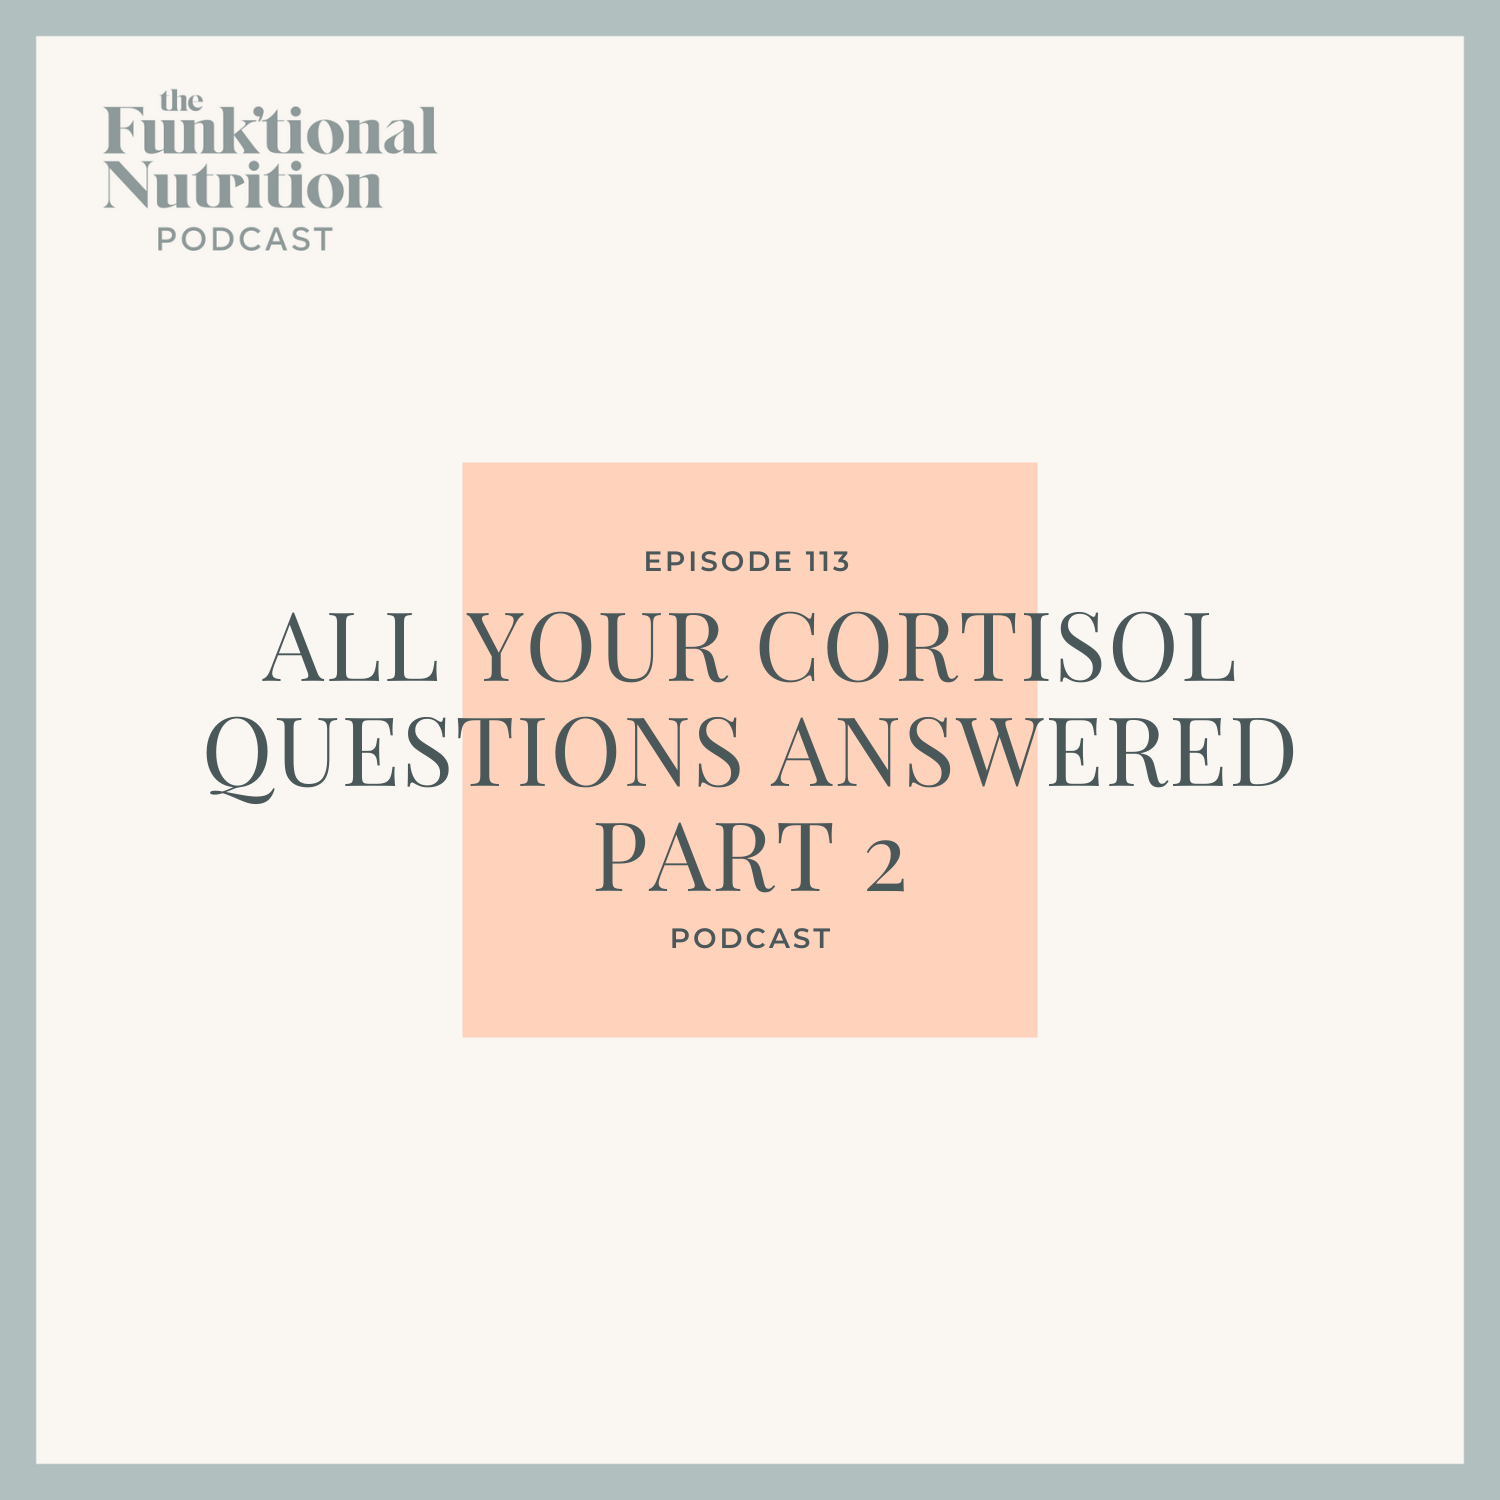 Episode-113-All-Your-Cortisol-Questions-Answered-Part-2-The-Funk_tional-Nutrition-Podcast.png